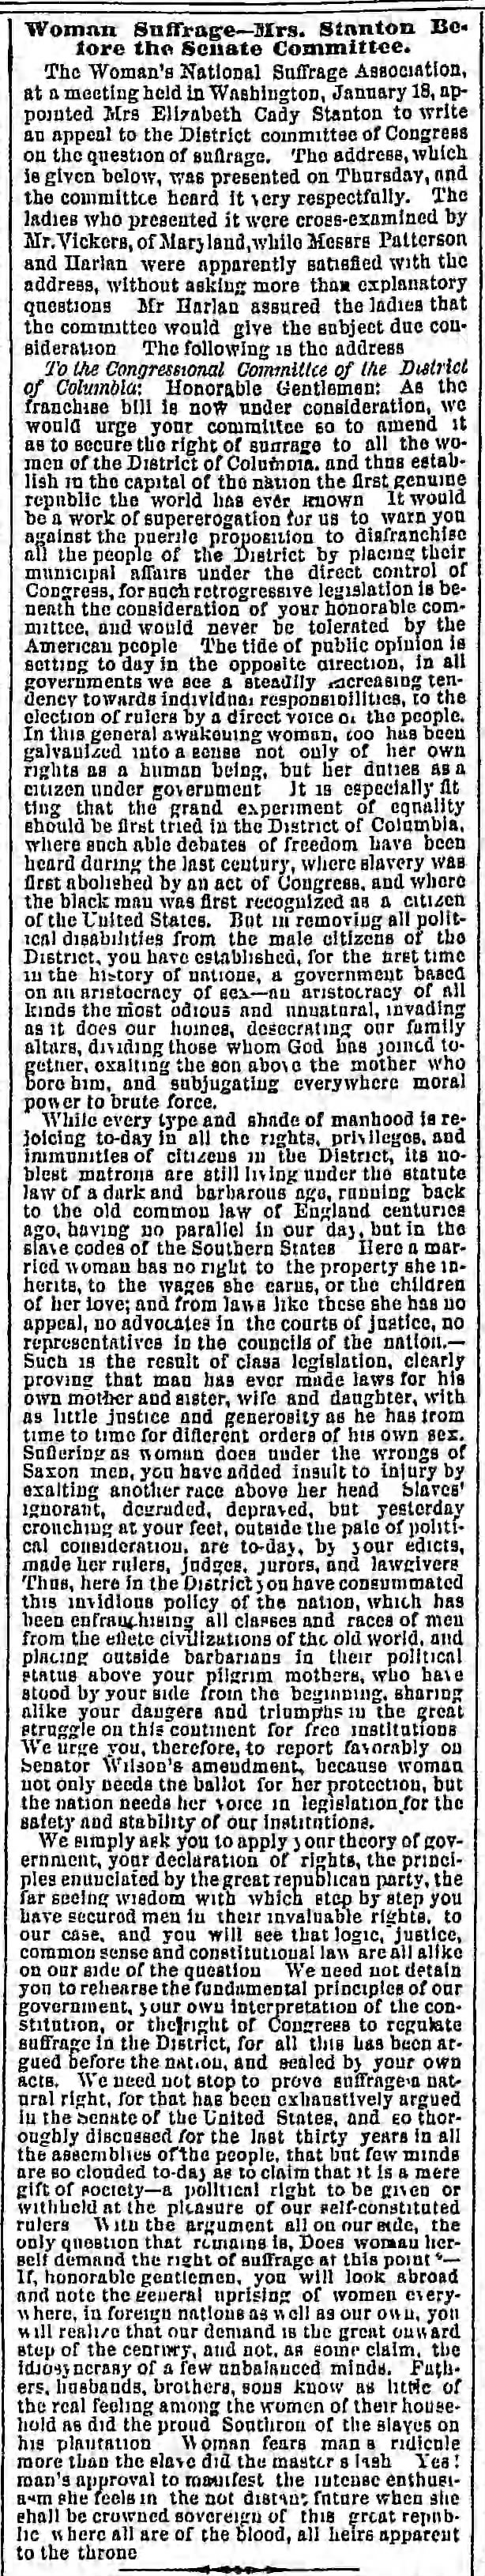 Elizabeth Cady Stanton addresses the Congressional Committee of the District of Columbia in 1869.